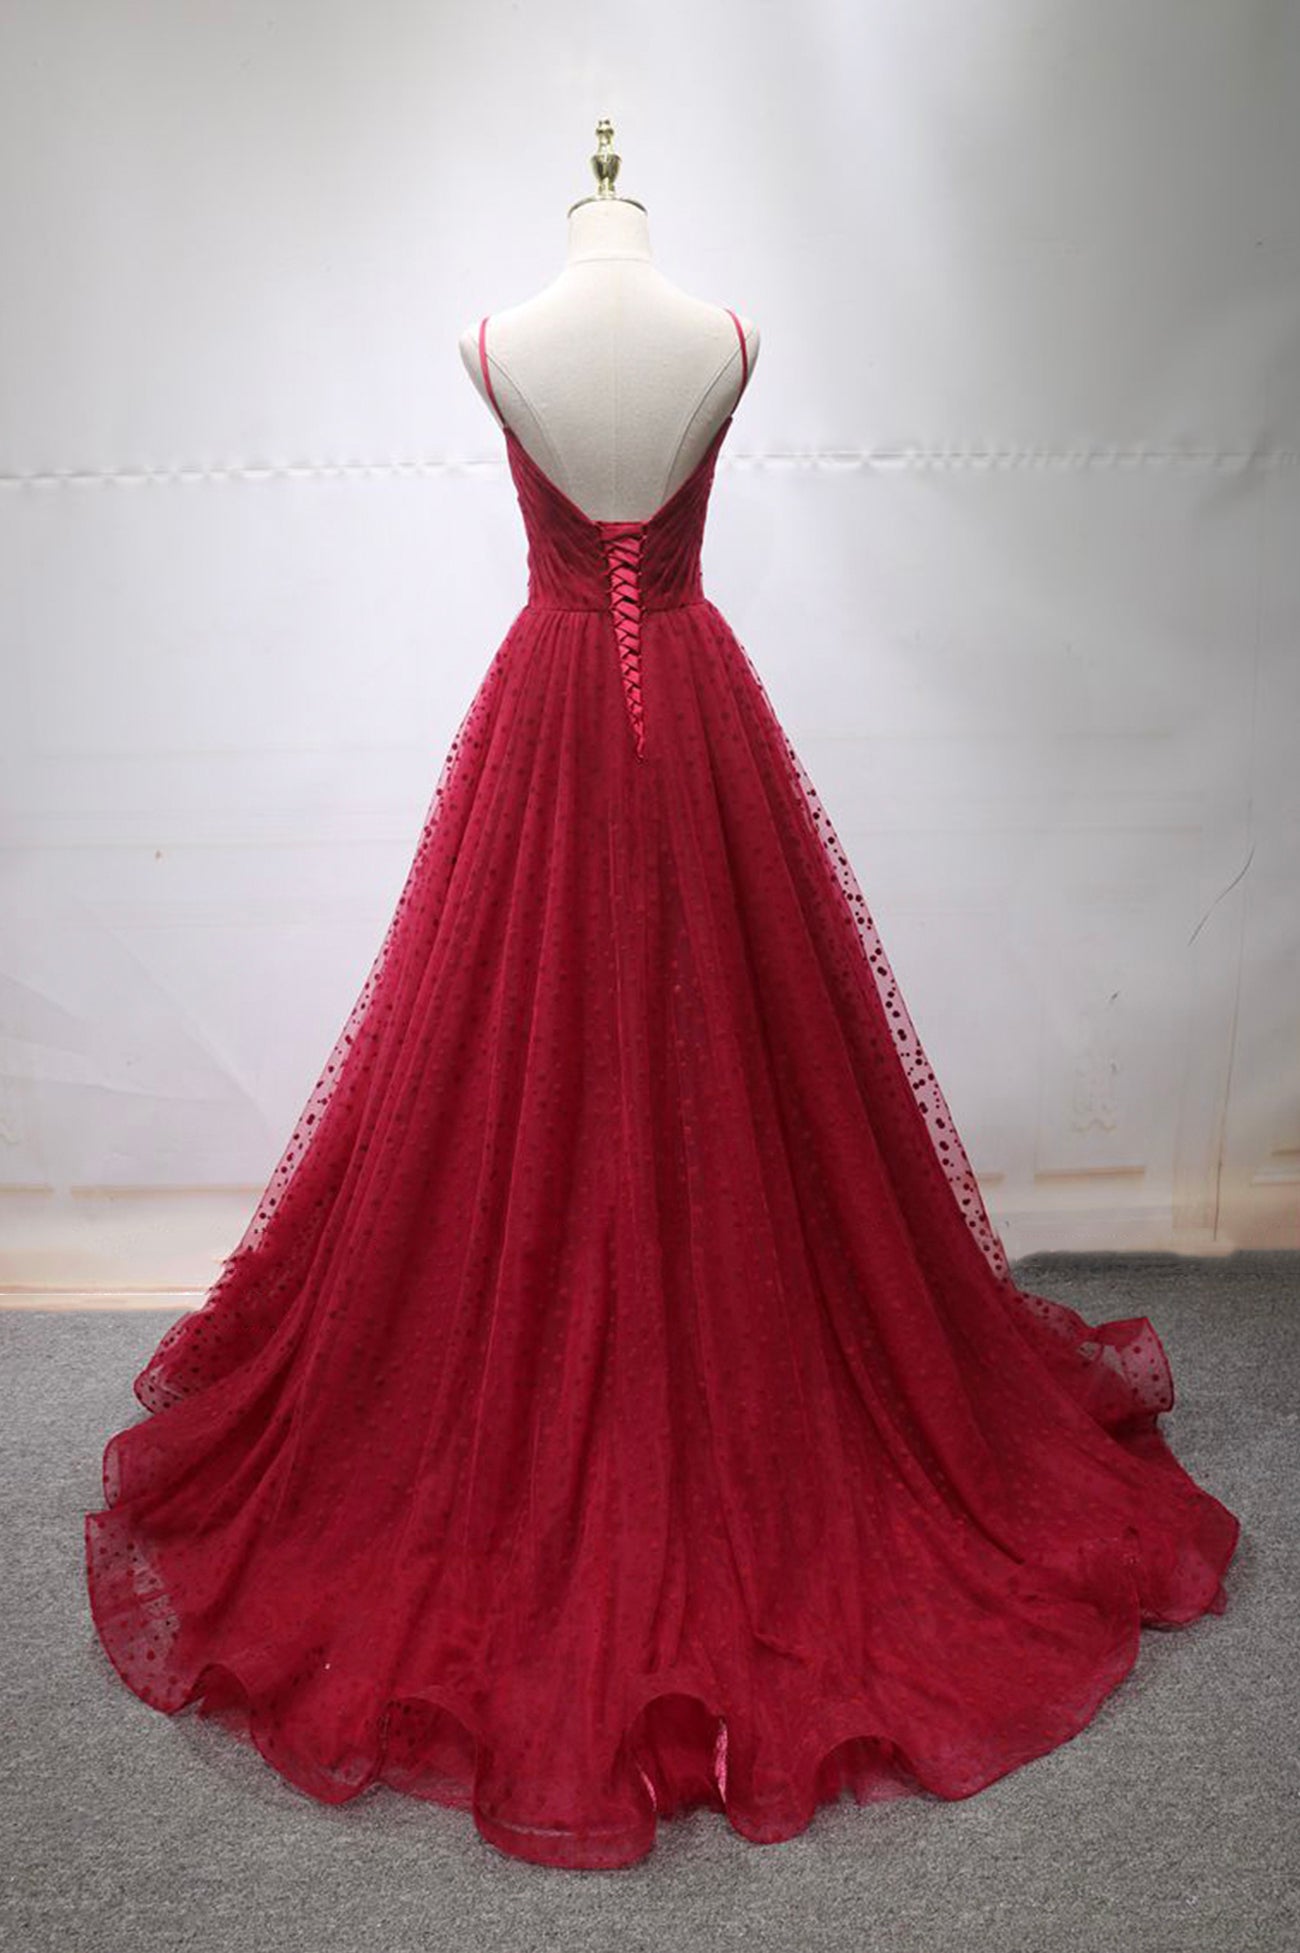 Prom Dresses With Shorts Underneath, Burgundy V-Neck Tulle Long Prom Dress, A-Line Backless Evening Party Dress